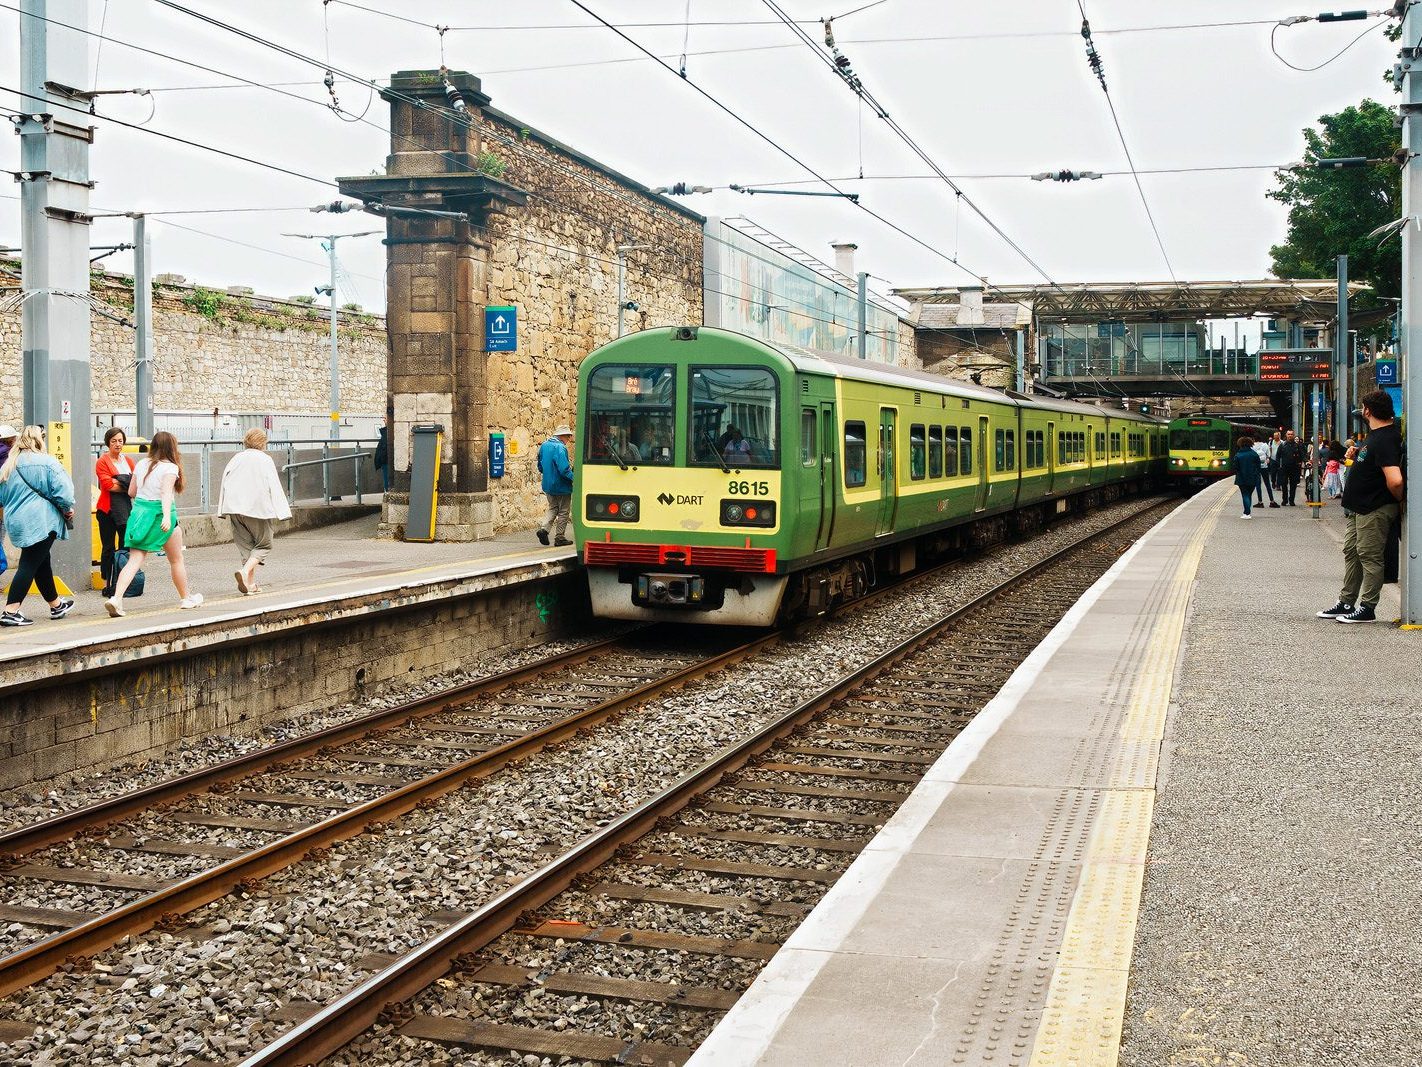 DID YOU KNOW THAT IT IS MALLIN STATION [THE TRAIN STATION IN DUN LAOGHAIRE] 008